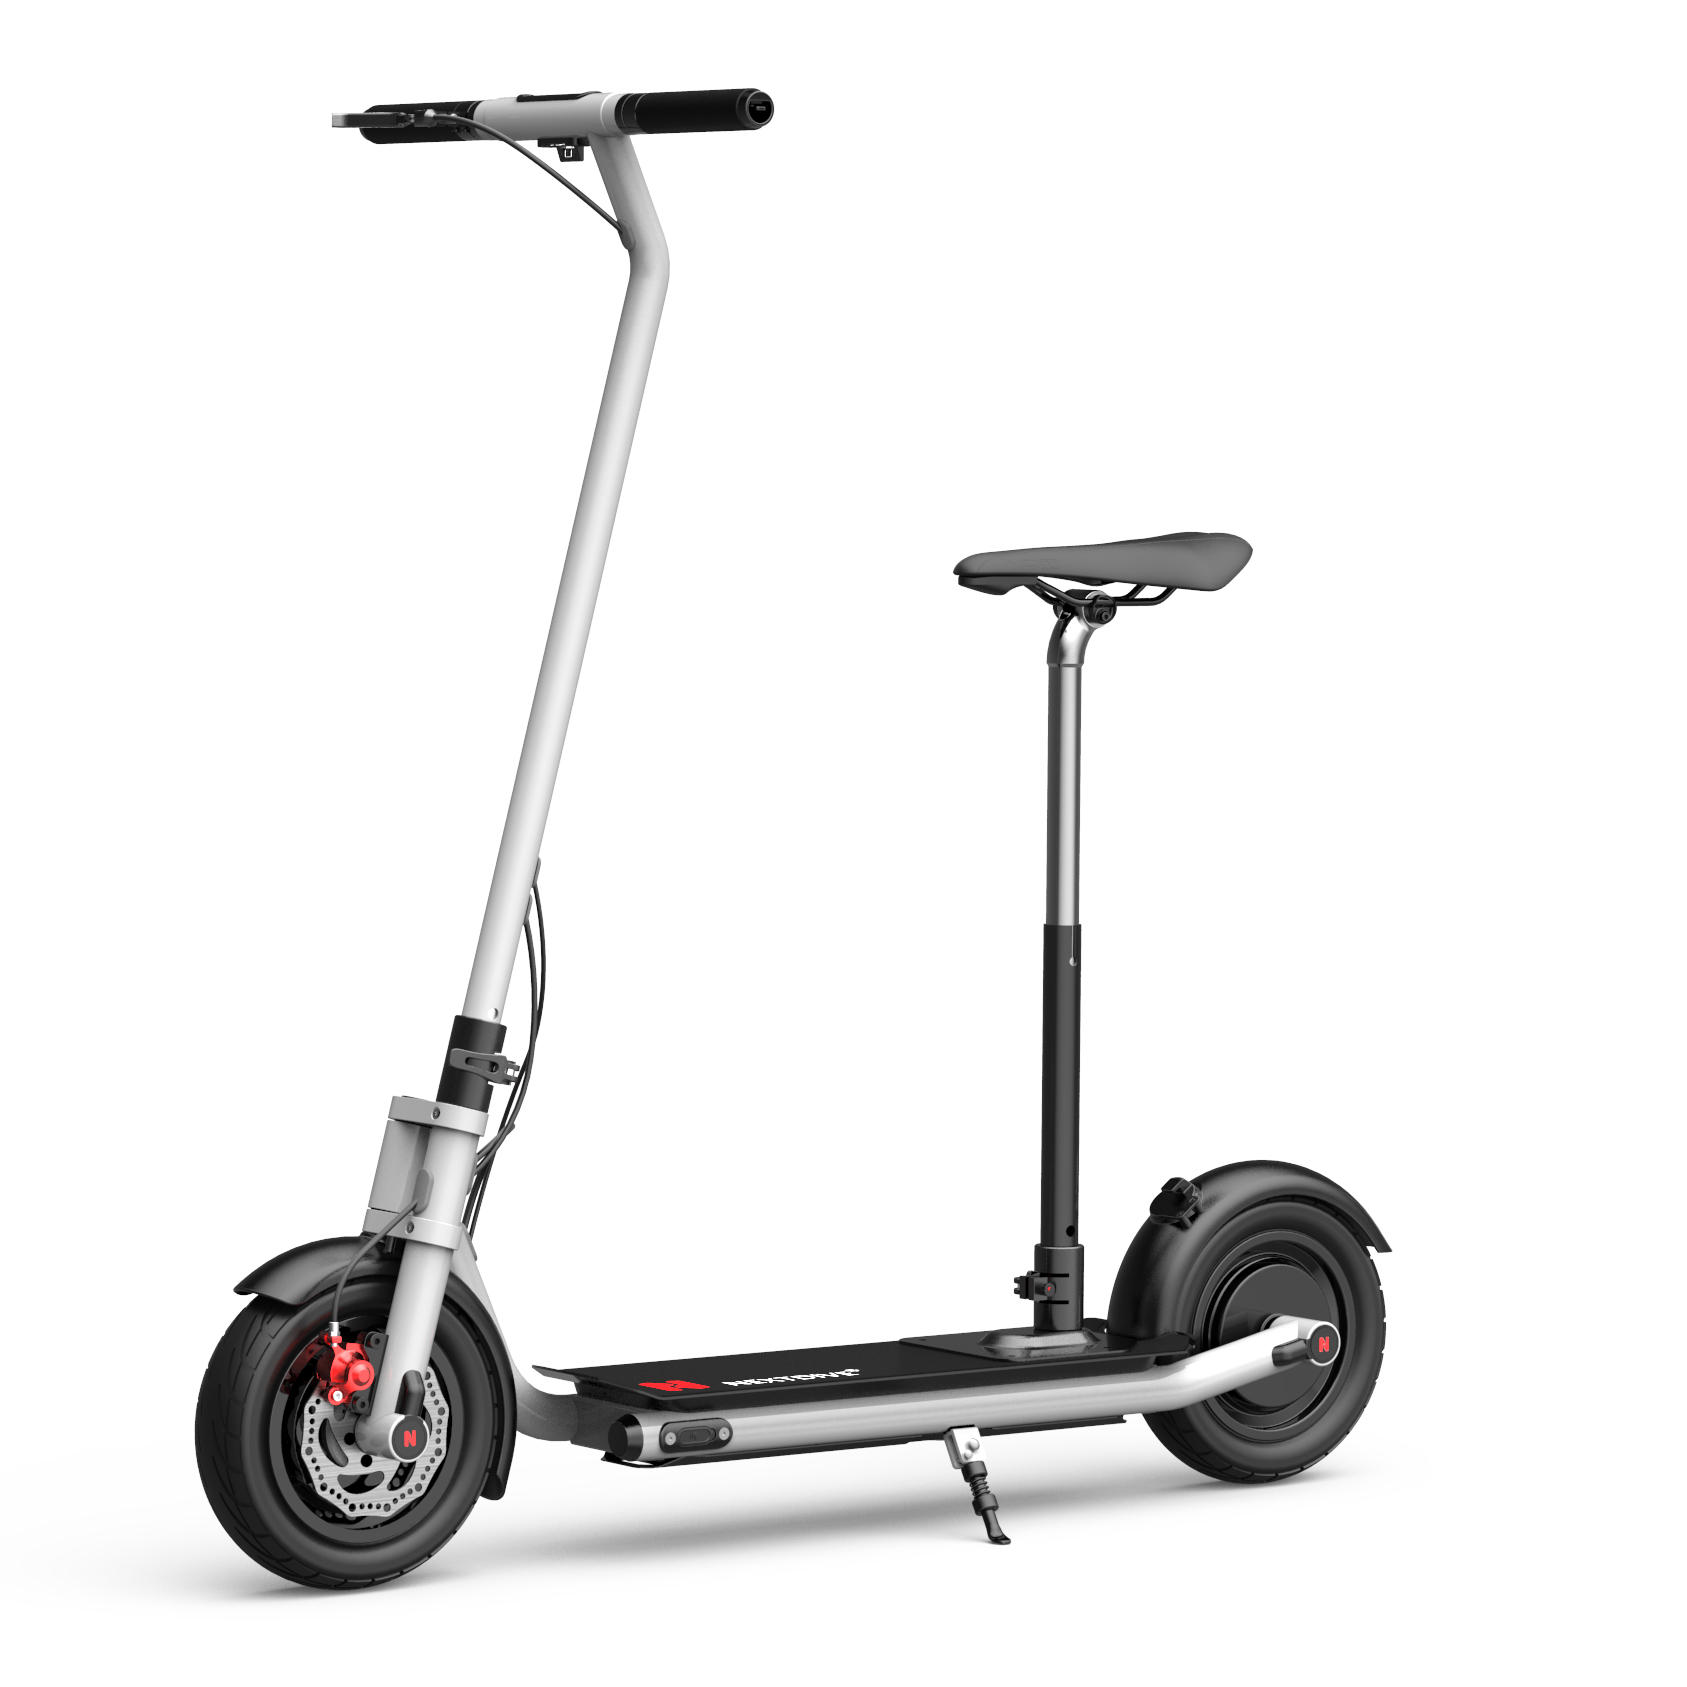 NEXTDRIVE N-7 300W 36V 10.4Ah Foldable Electric Scooter With Saddle For Adults/Kids 26 Km/h Max Speed 18-36 Km Mileage 